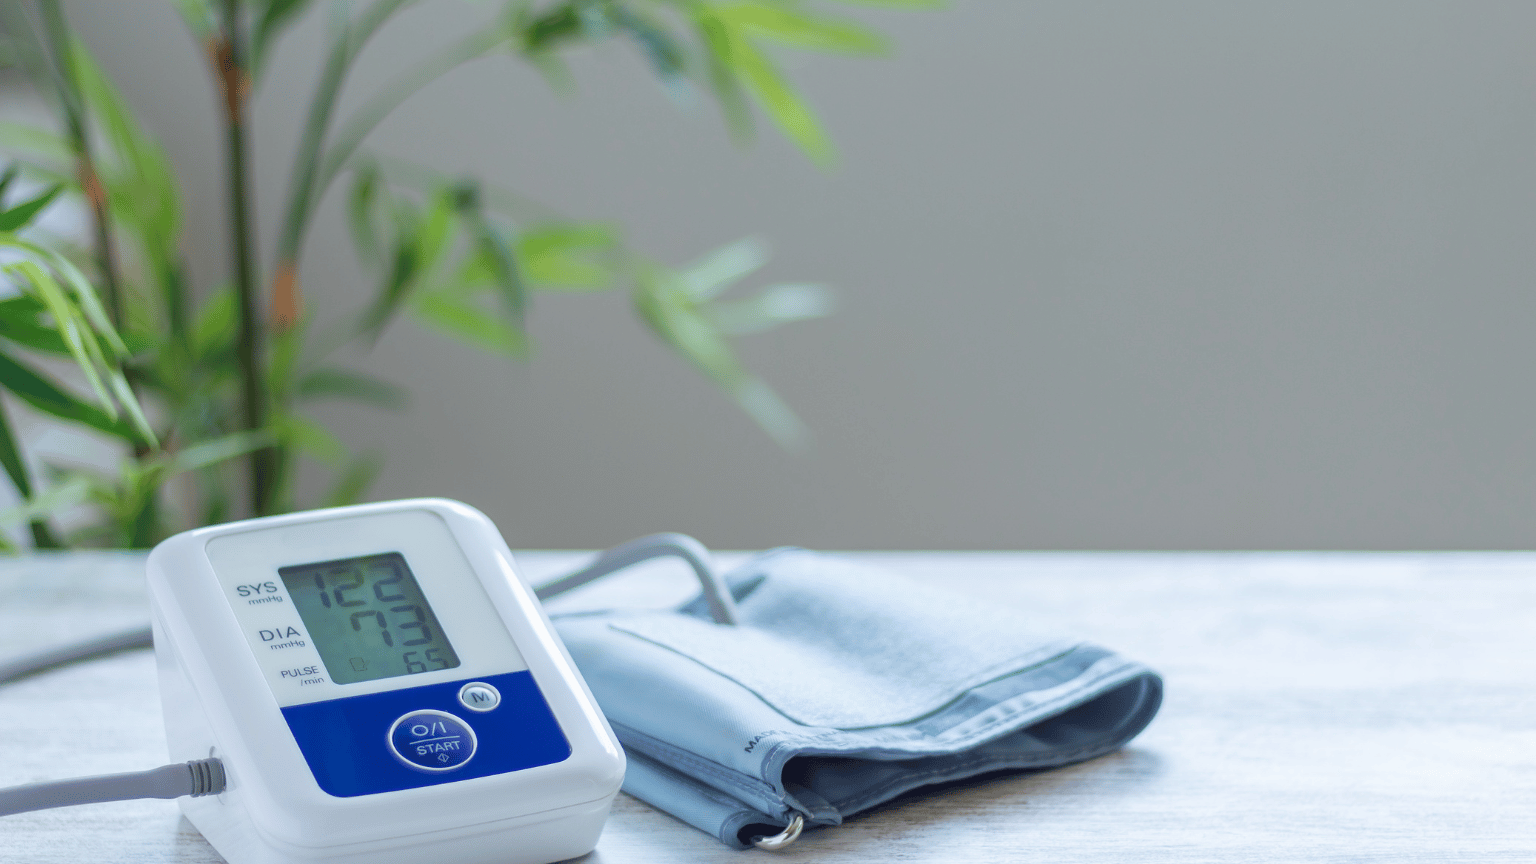 What Is The Normal Blood Pressure?